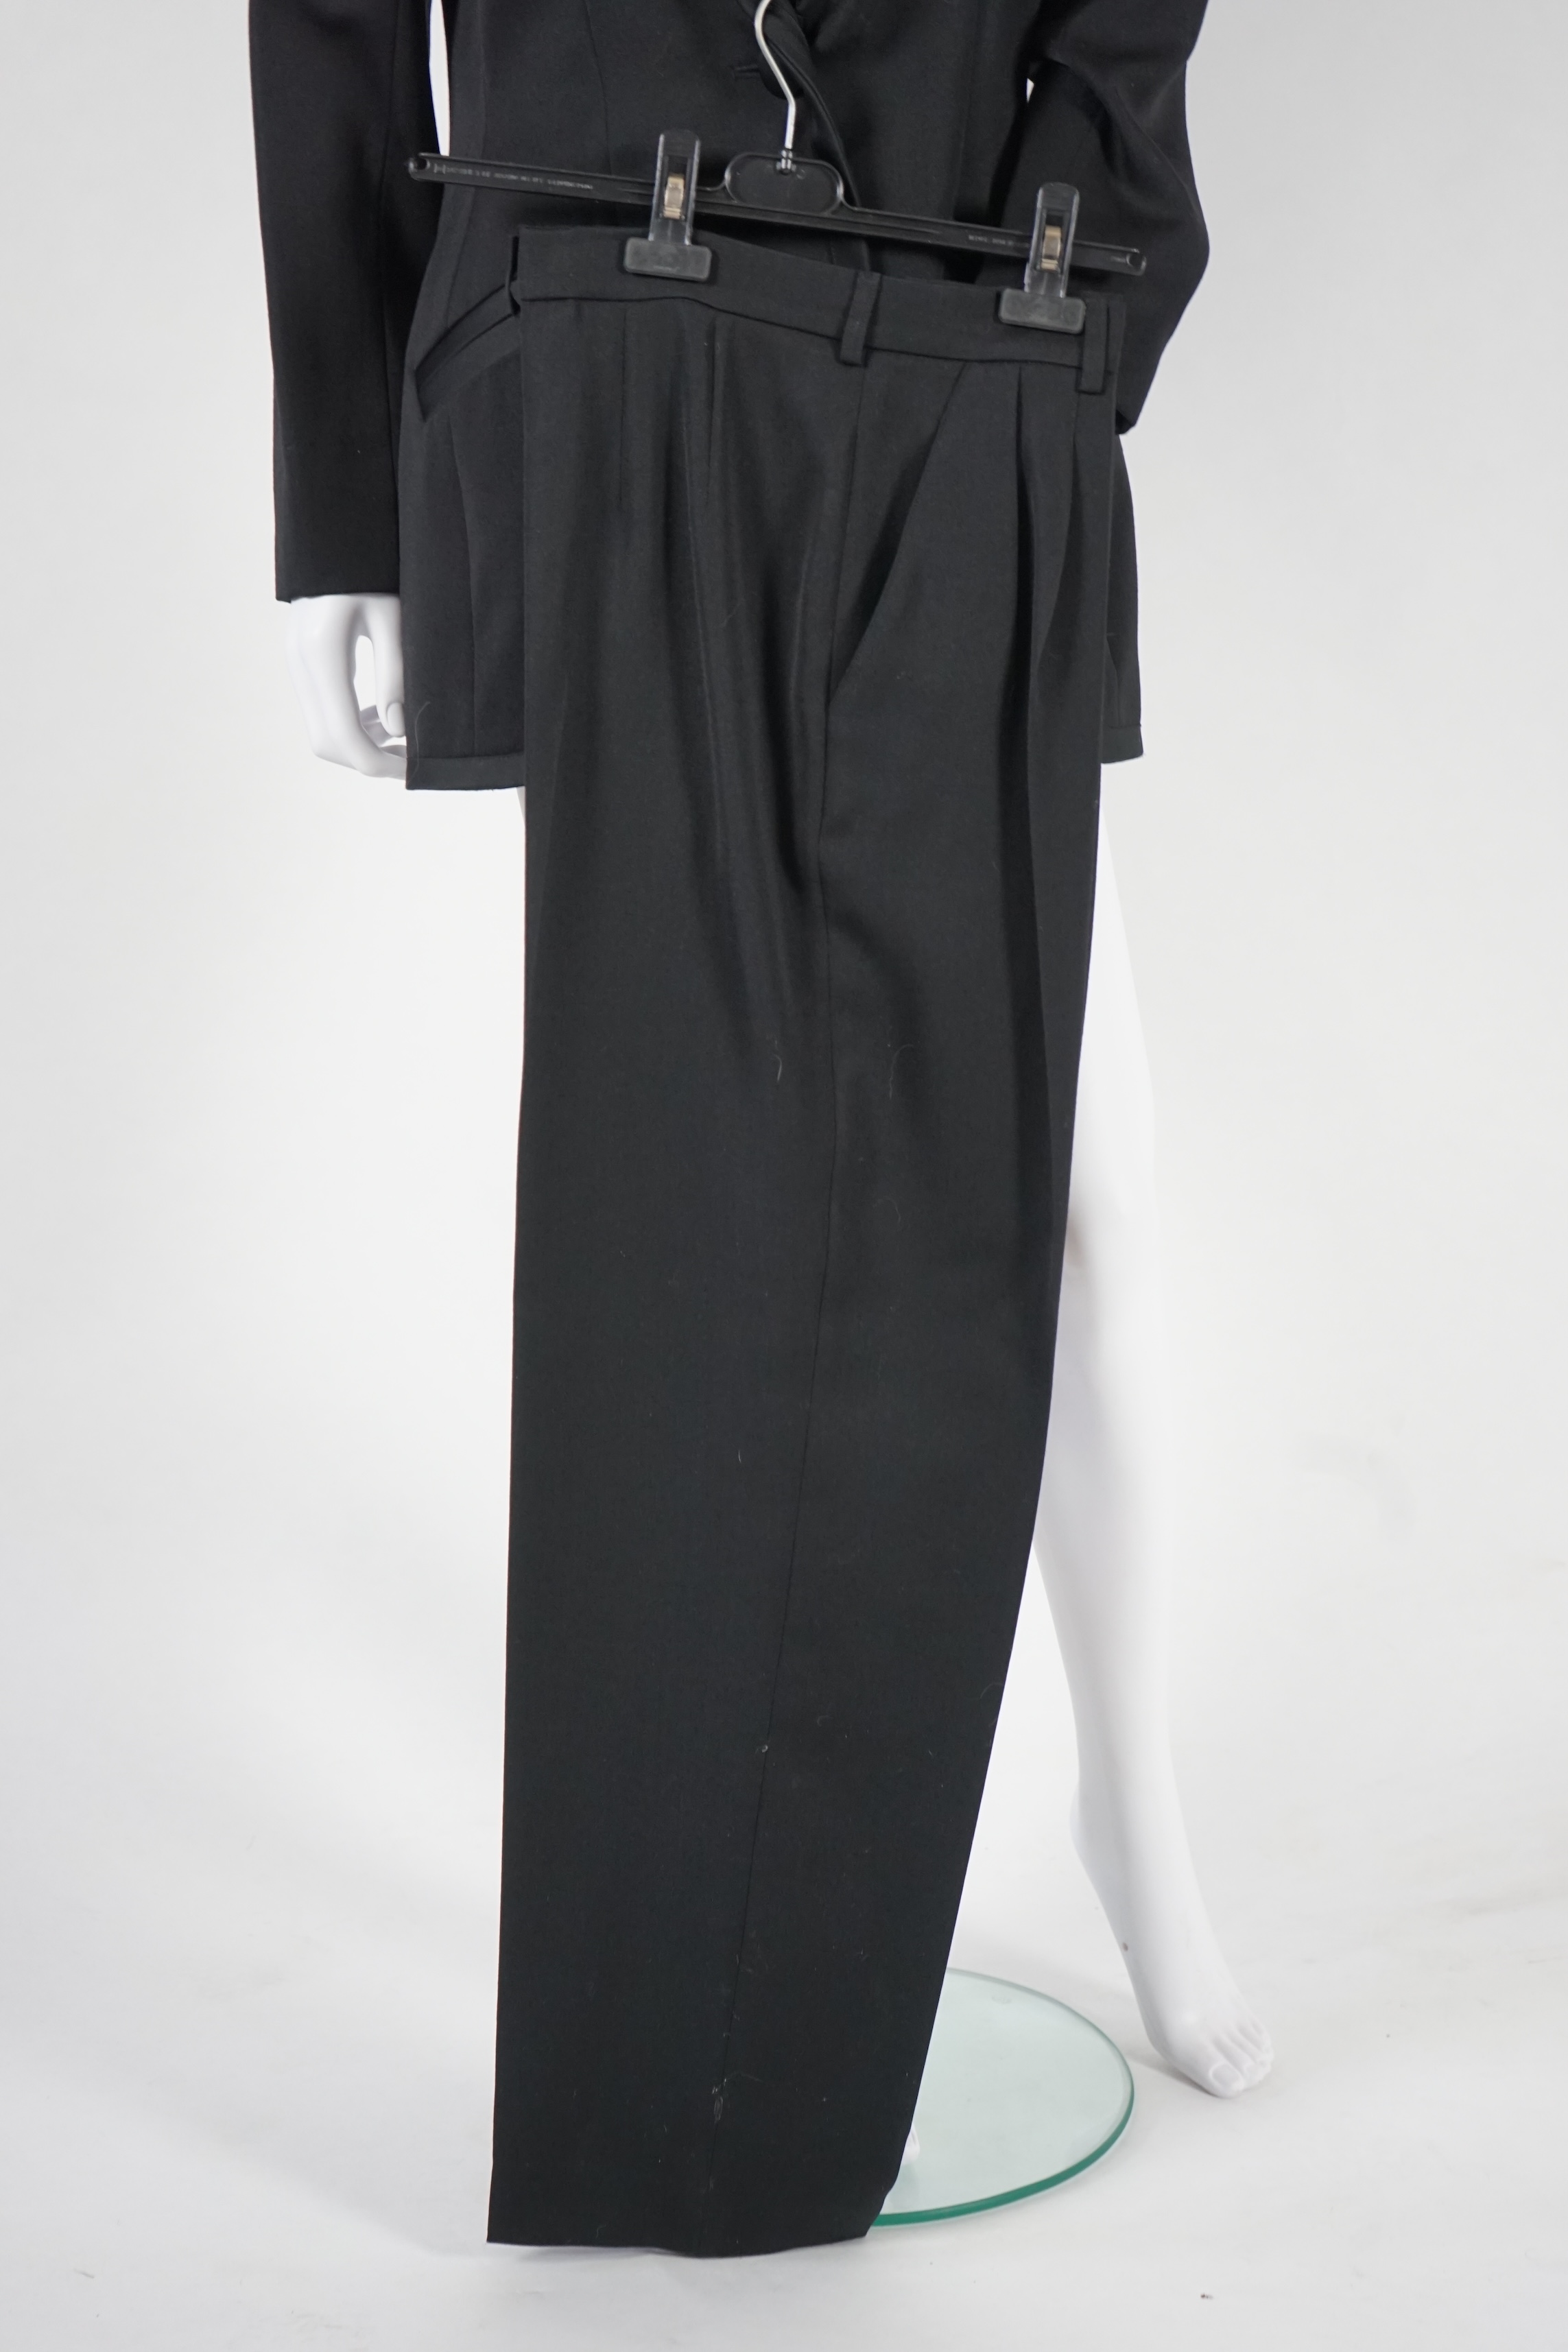 Two vintage Yves Saint Laurent lady's variation black trouser suits, F 42 (UK 14). Please note alterations to make the waist smaller may have been carried out on some of the skirts. Proceeds to Happy Paws Puppy Rescue.